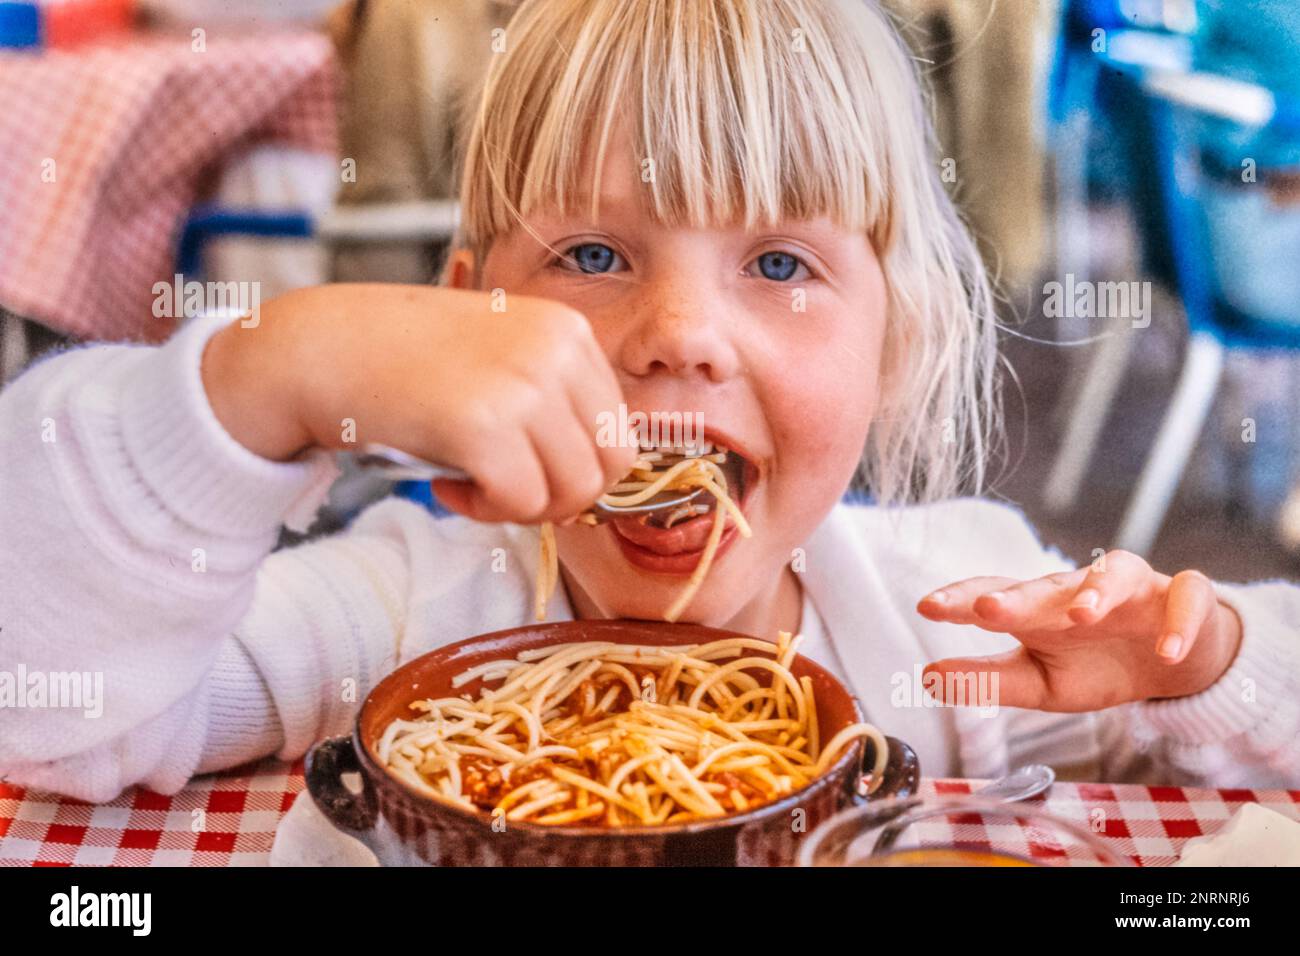 Child eating spaghetti bolognese, Daughter on holiday in an italian restaurant enjoying meal. Stock Photo